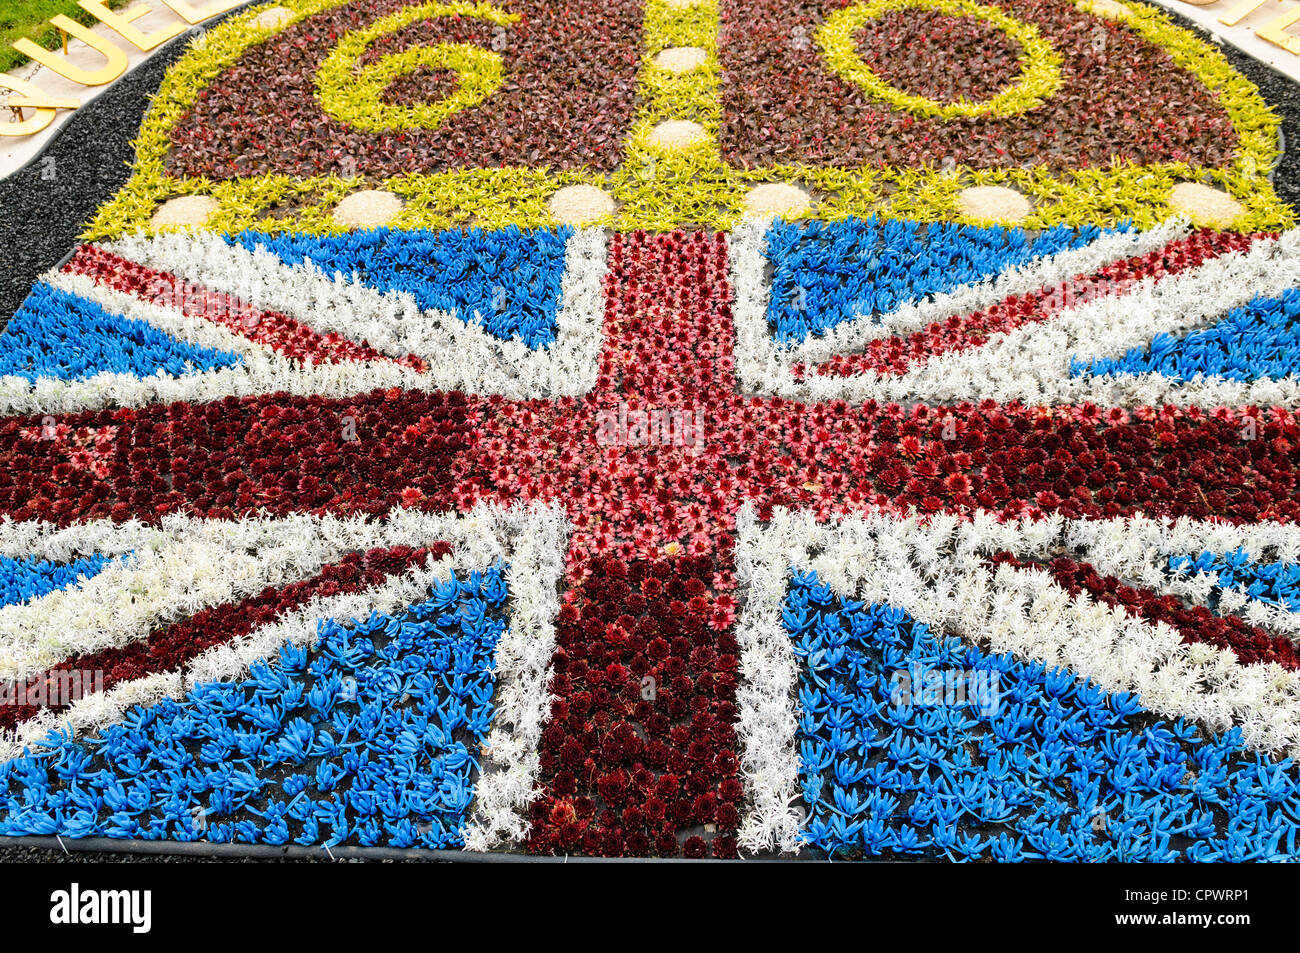 Union Jack flag made out of alpine plants to celebrate the Queen's Diamond Jubilee Stock Photo